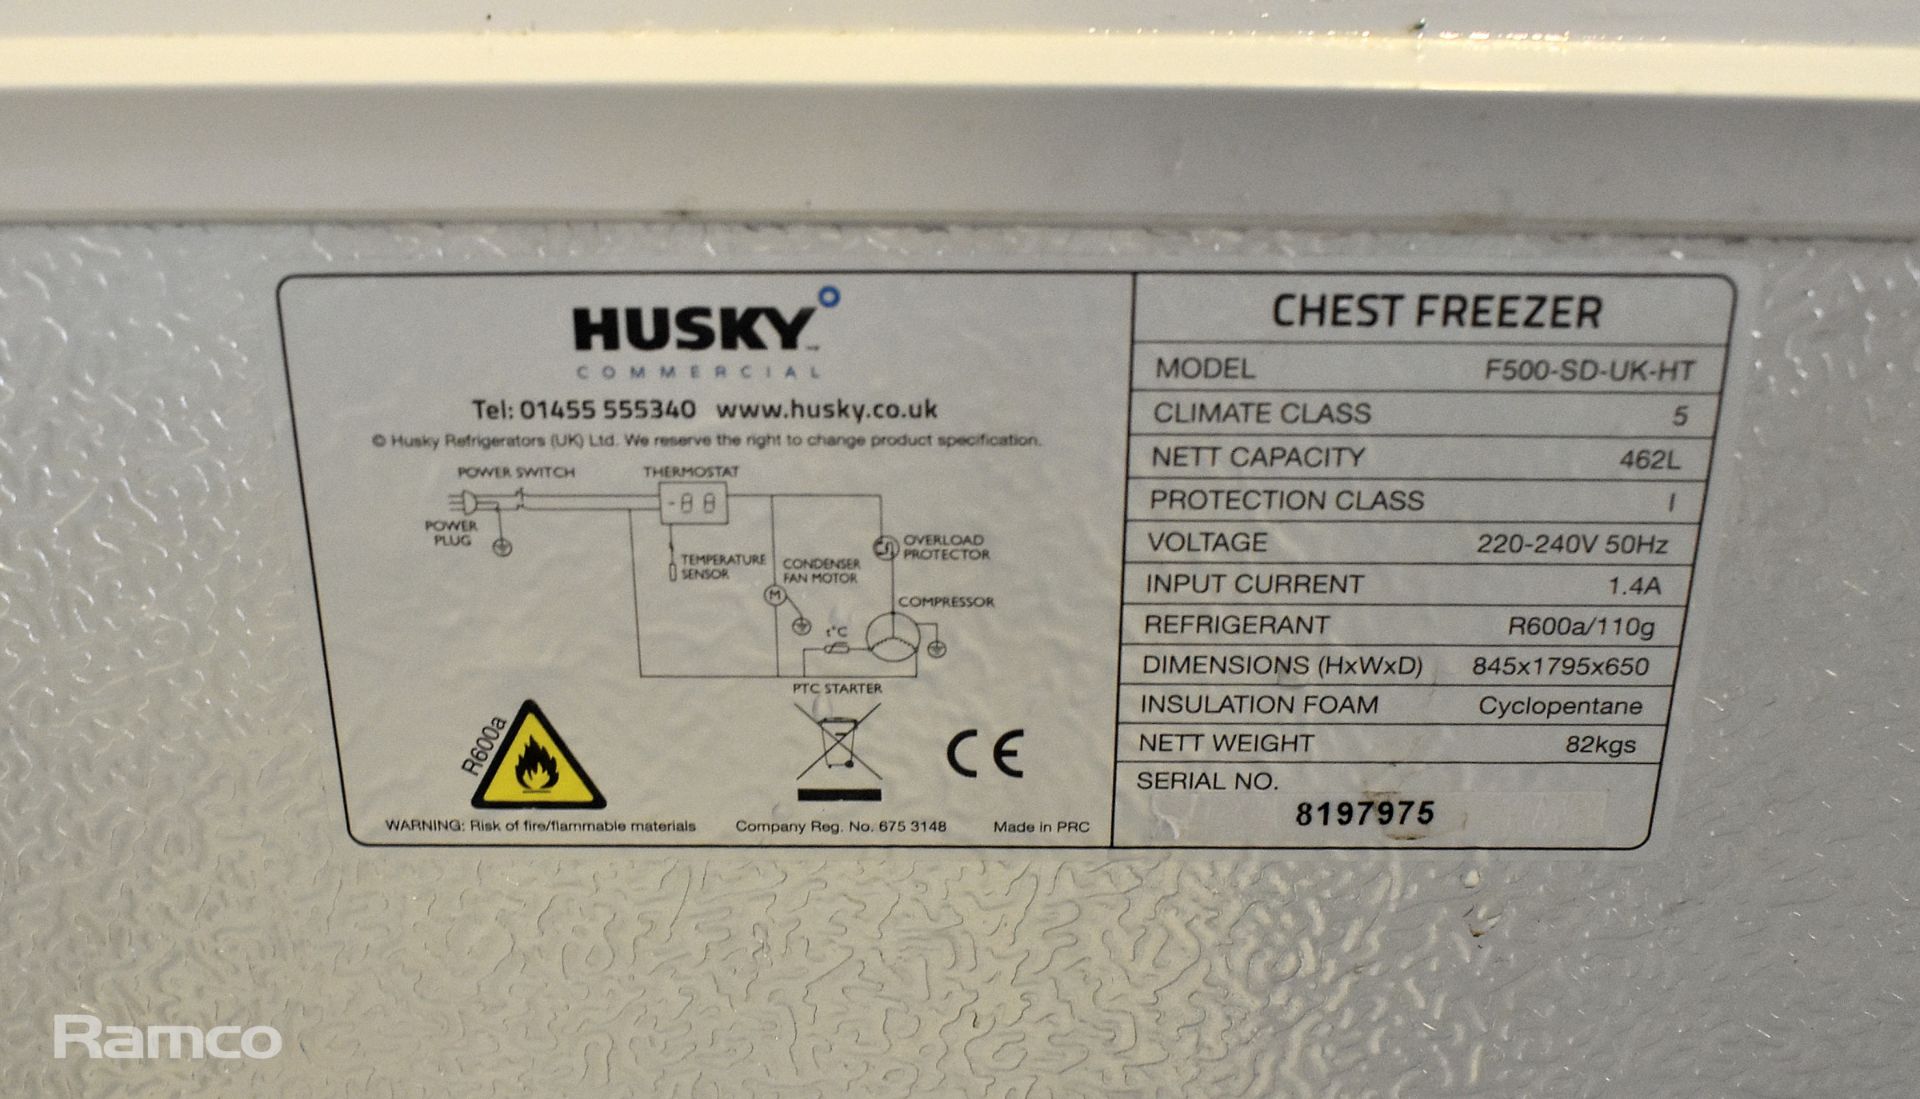 Husky F500 Chest freezer 462L, 220/240V 50Hz - L180 x W75 x H93cm - Image 3 of 6